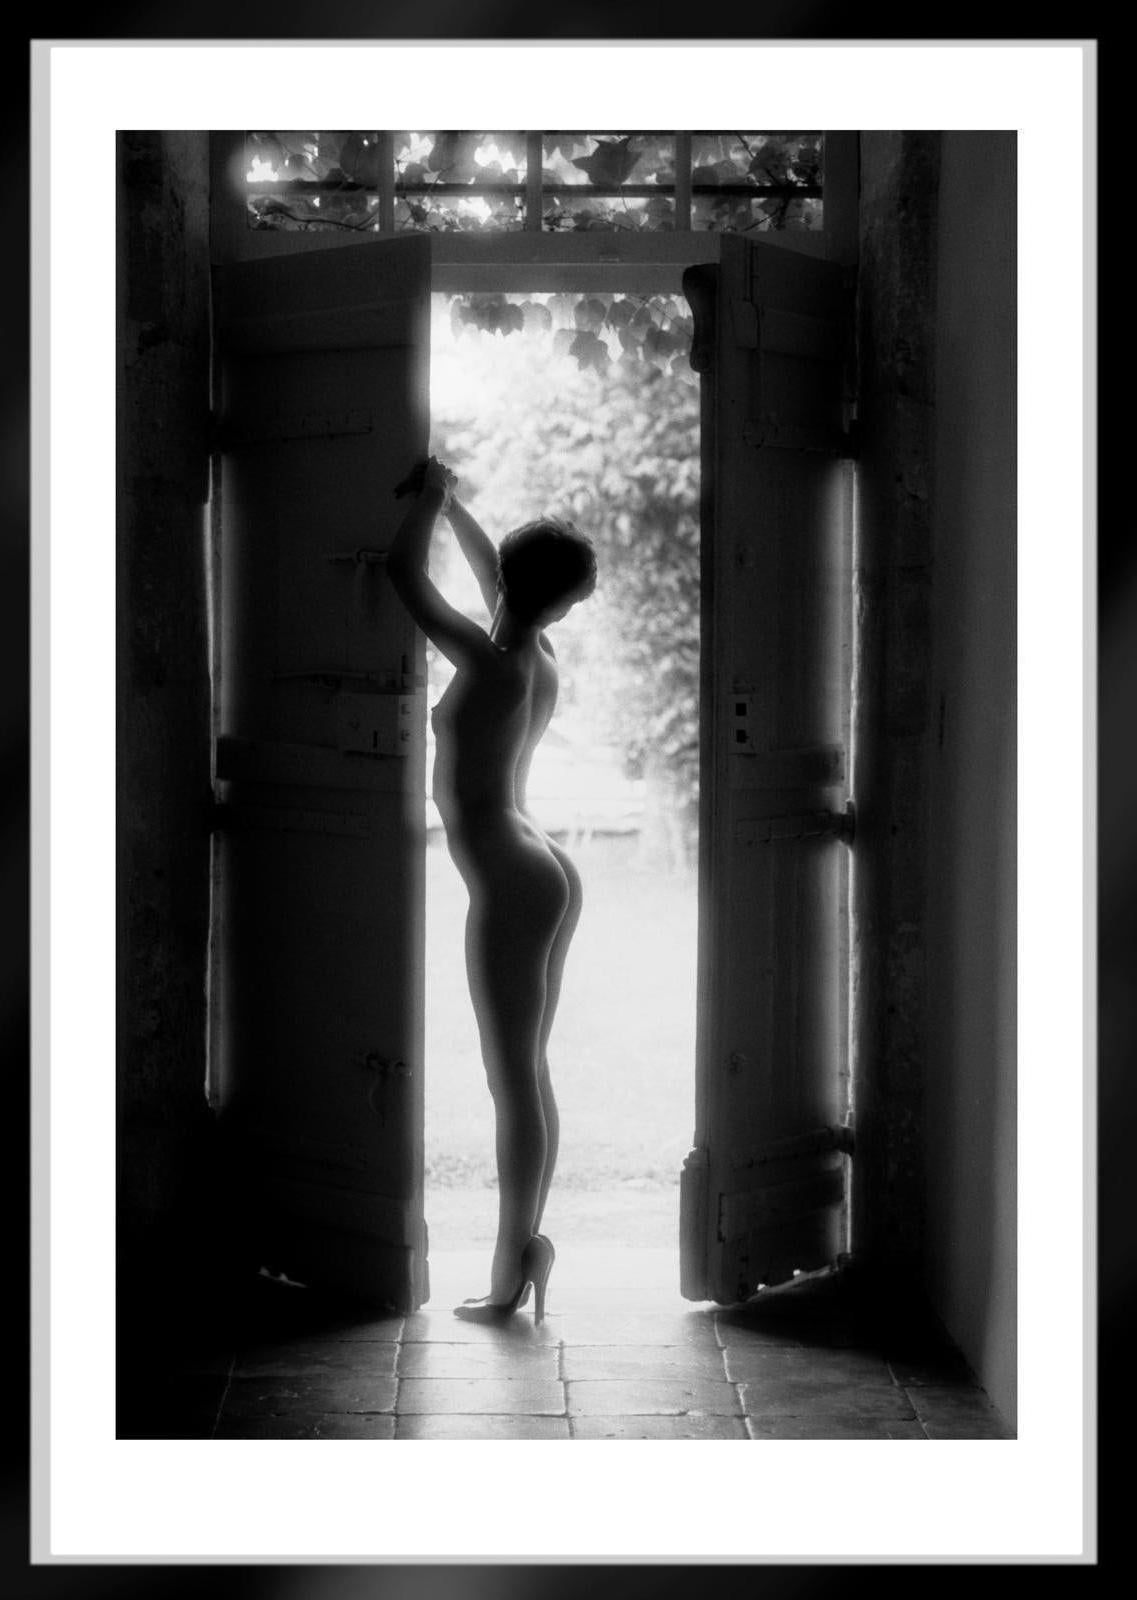 Lisa - Signed limited edition nude print, Black white photo, Contemporary, Sexy - Photograph by Ian Sanderson